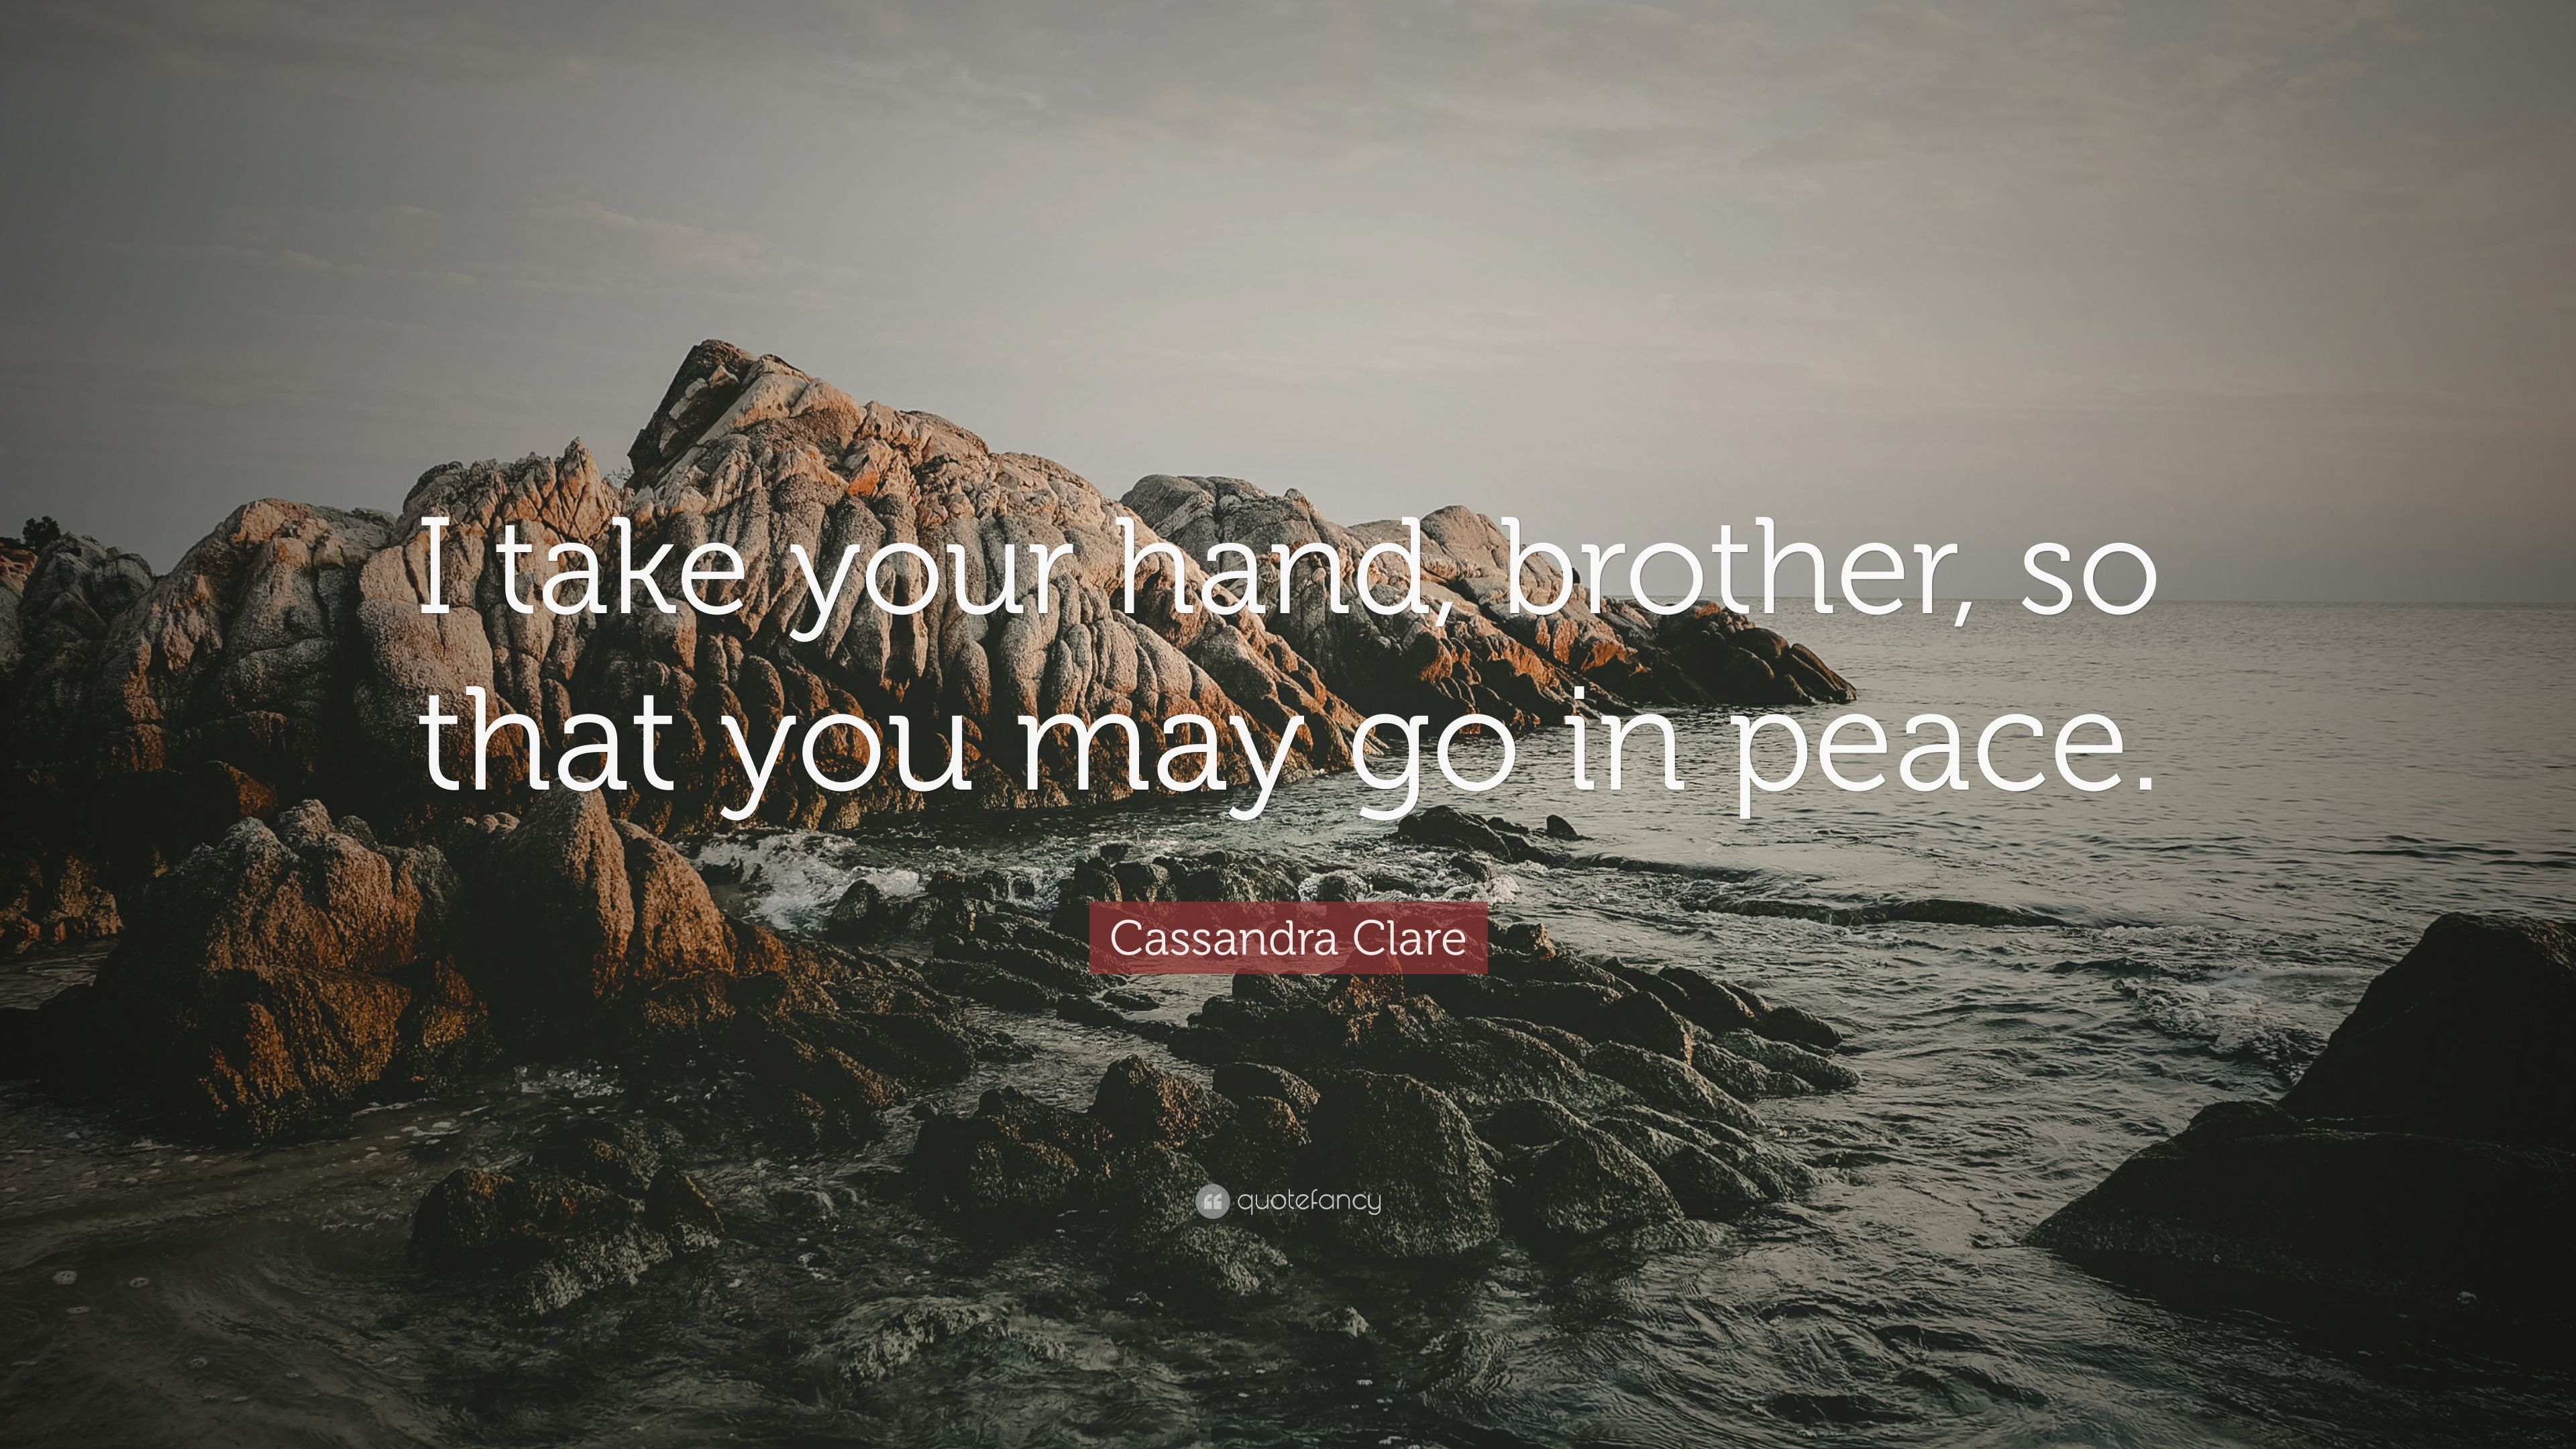 Cassandra clare quote âi take your hand brother so that you may go in peaceâ